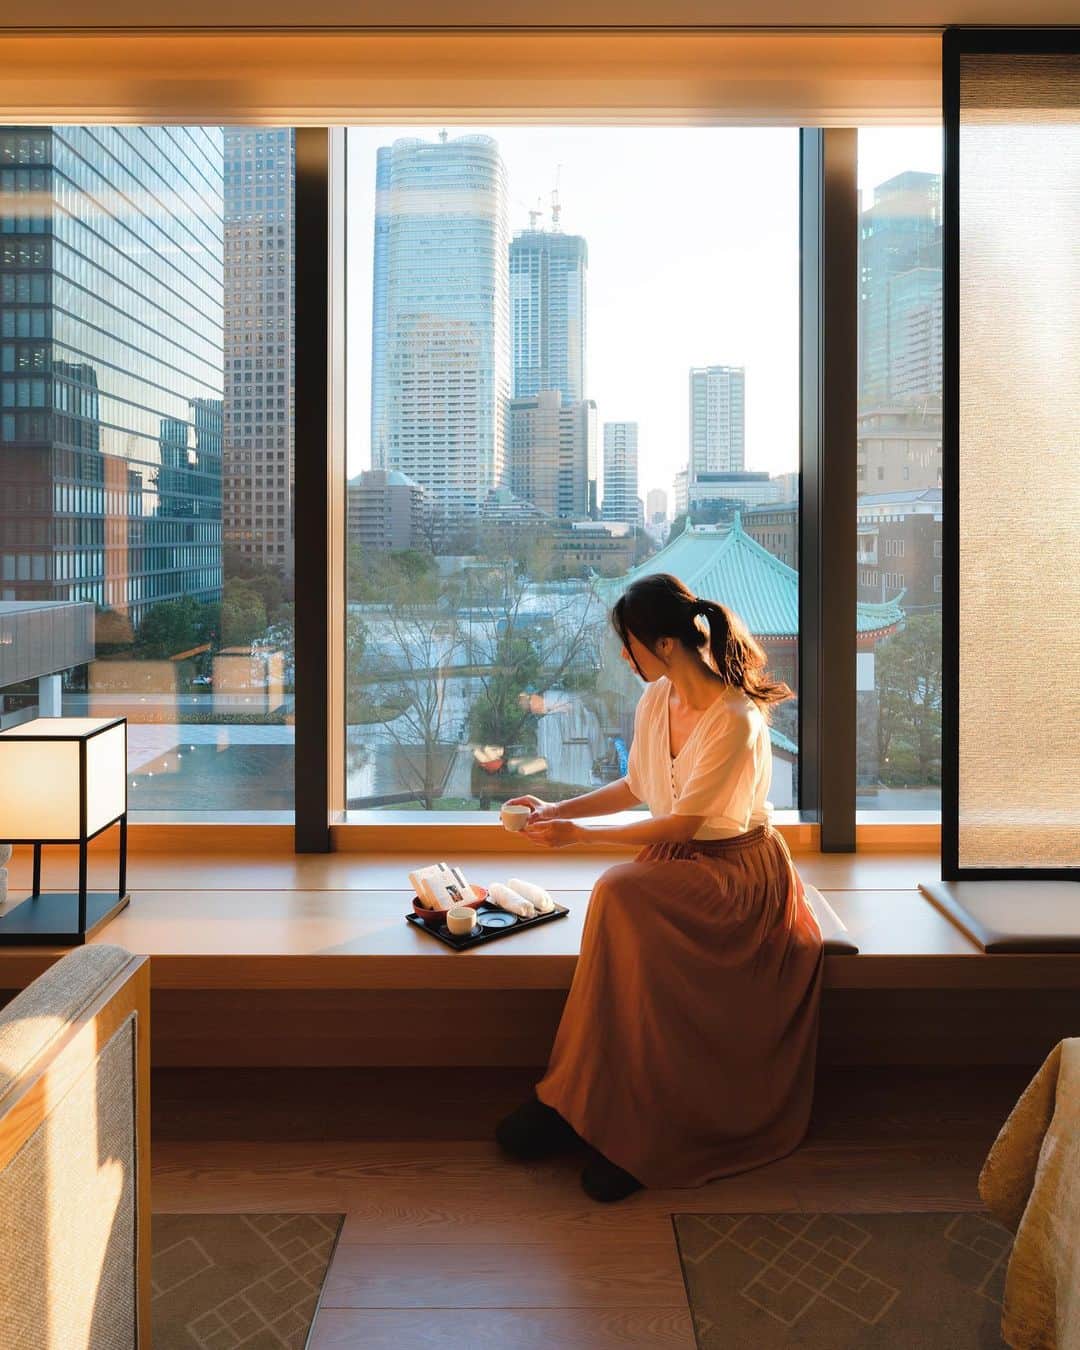 ホテルオークラ東京 Hotel Okura Tokyoさんのインスタグラム写真 - (ホテルオークラ東京 Hotel Okura TokyoInstagram)「Serenity and composure as a private residence🍵 はなれのような落ち着きと静謐さを🌿  Immerse yourself in the serene beauty of Japanese design in our Heritage Room. Averaging a generous 60 square meters in size, this private residence offers two styles: one with a wider living room that overlooks Okura Square and the classical architecture of the Okura Museum of Art, or one with views from the bath. Among the latter, some rooms have a balcony situated directly above the Okura Garden. As the benchmark of luxury in the Okura Heritage wing, the tranquil Heritage Room features a private steam sauna, a whirlpool bath, and heated flooring. The complimentary minibar, shoeshine service, and valet  parking, too, invite you to relax in true pampered comfort.  「ヘリテージルーム」の広さは約60㎡で、ビューバスタイプと、エントランスのオークラスクエアと大倉集古館が眺められるワイドリビングタイプの2タイプがございます。中でもビューバスタイプのお部屋では、オークラ庭園を眺められるバルコニー付きのお部屋もご用意しております。 オークラ ヘリテージウイングでは、全室スチームサウナ、ジェットバス、そして床暖房を完備。さらに、冷蔵庫内ミニバー、靴磨きサービス、バレーサービス等、各種無料サービスをご用意しております。まるではなれのような静謐さとプライベート空間が広がる館内で、ゆっくりとお寛ぎください。  “Heritage Room” The Okura Heritage Wing 「ヘリテージルーム」 オークラ ヘリテージウイング  #ホテル客室 #おもてなし  #ホテルステイ #ステイケーション #ワーケーション  #東京ホテル #都内ホテル #港区ホテル #ラグジュアリーホテル  #theokuratokyo #オークラ東京  #hotelroom  #suiterooom #staycation #tokyohotel #luxuryhotel #luxurylifestyle #luxuryhome #lhw #uncommontravel #lhwtraveler #东京 #酒店 #도쿄 #호텔 #일본 #ญี่ปุ่น #โตเกียว #โรงแรม #japon」6月20日 15時49分 - theokuratokyo